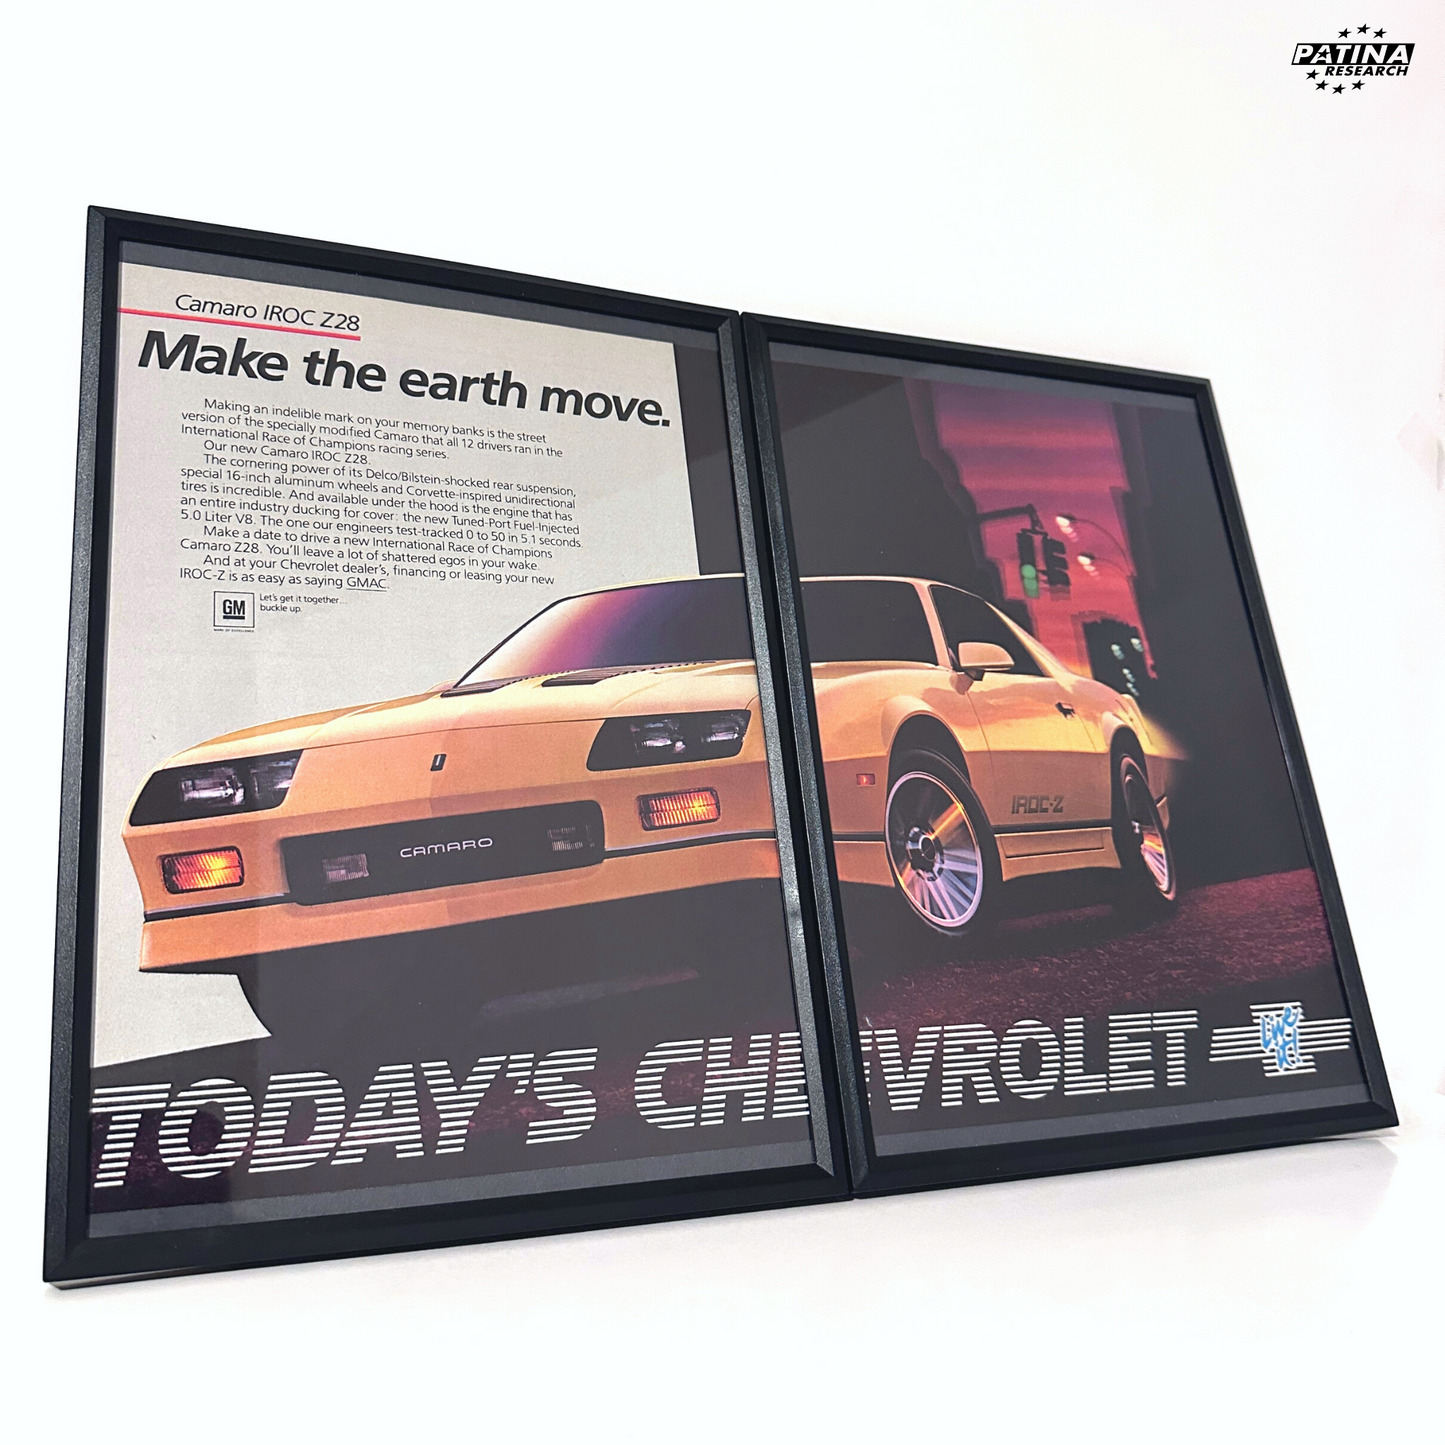 Todays Chevrolet earth move framed ad